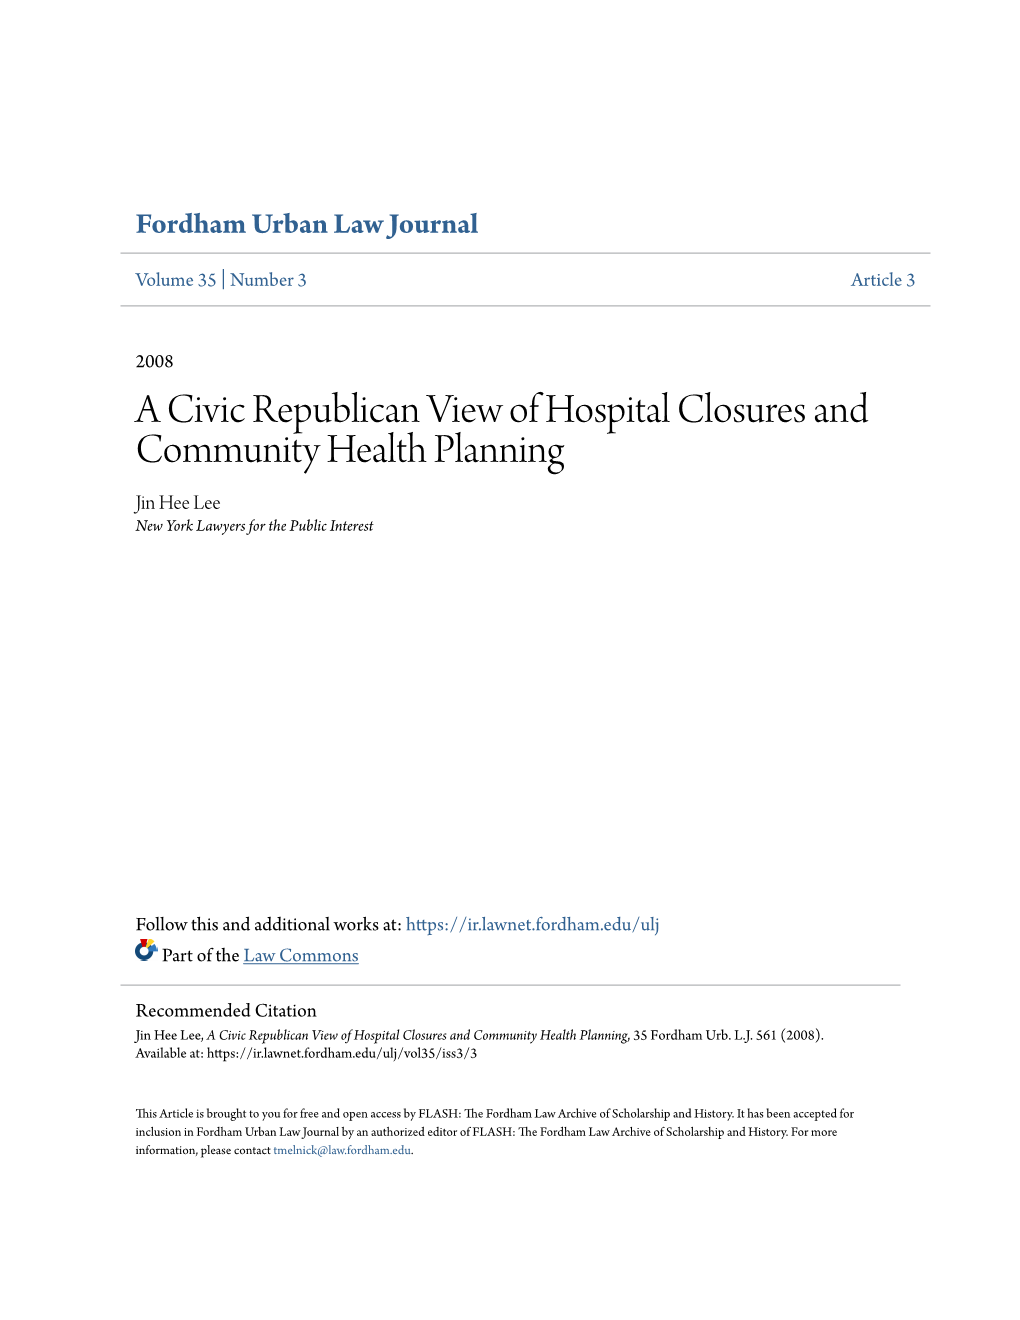 A Civic Republican View of Hospital Closures and Community Health Planning Jin Hee Lee New York Lawyers for the Public Interest